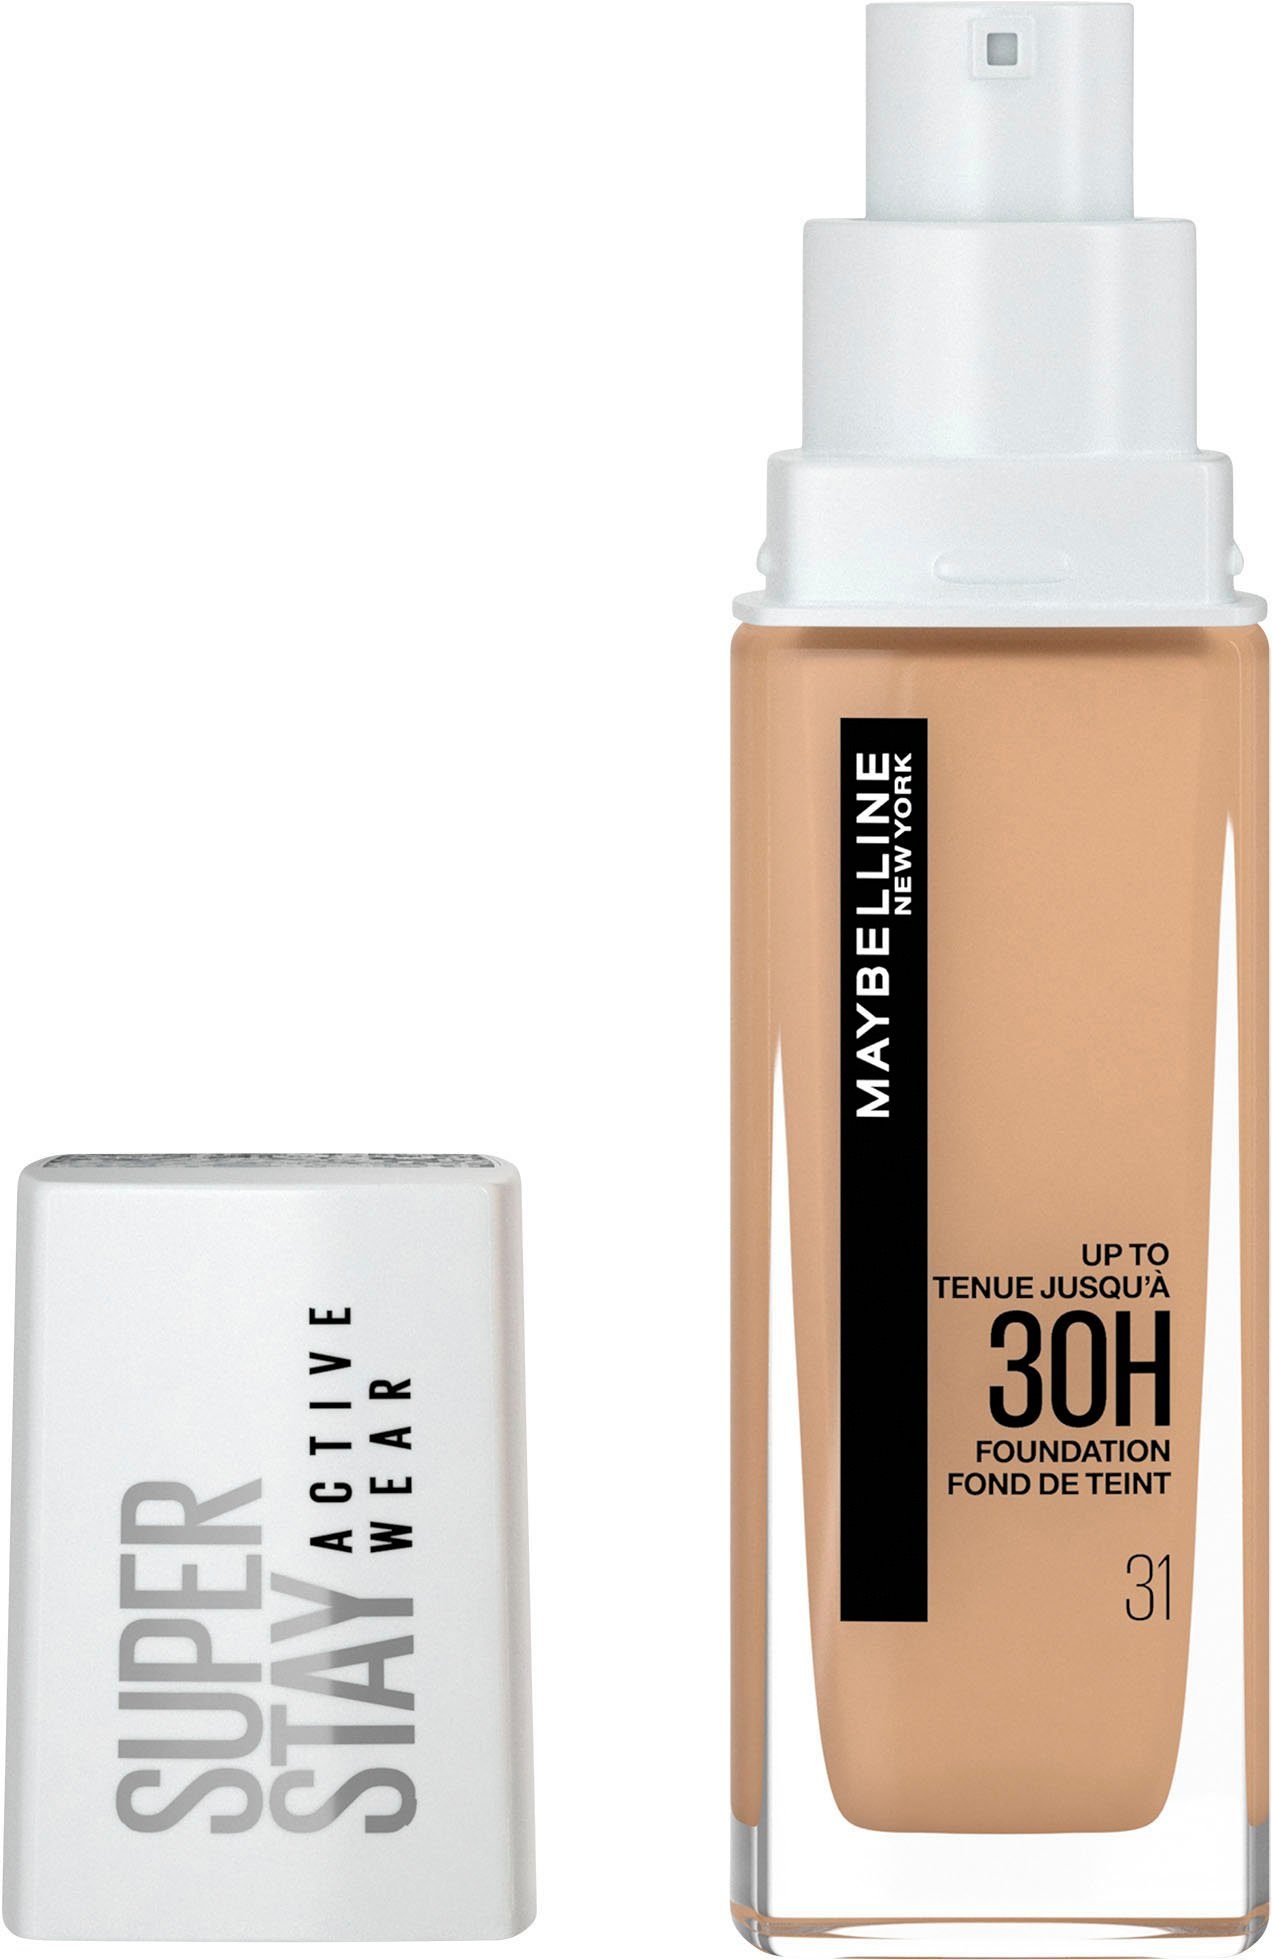 Nude Wear Warm Foundation 31 Stay MAYBELLINE Super Active NEW YORK